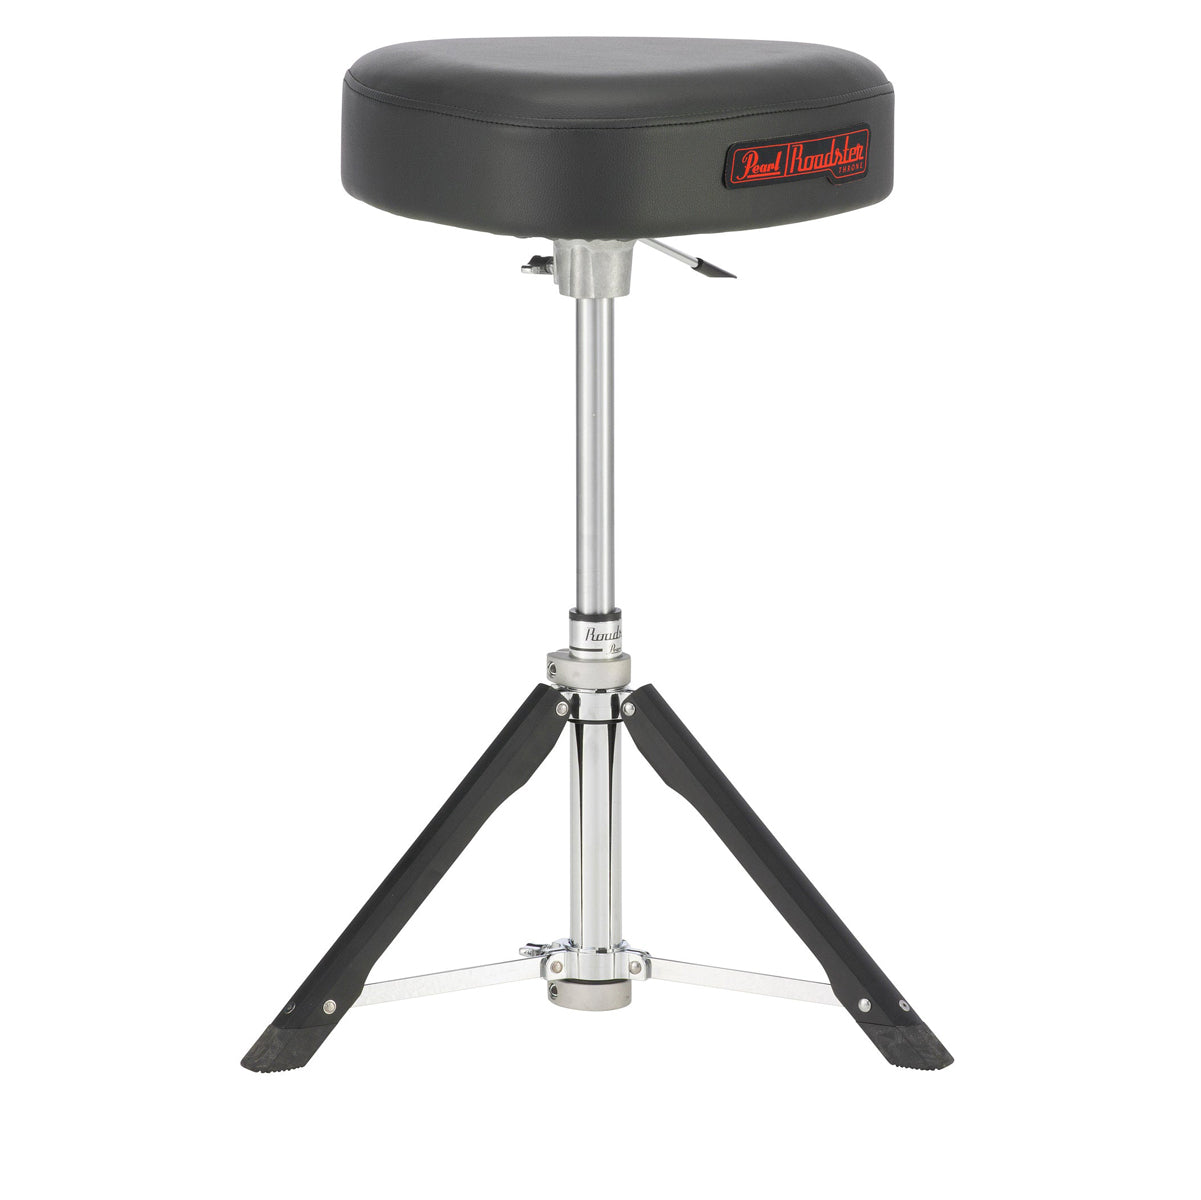 PEARL D-1500TGL Drum Throne, Trilateral